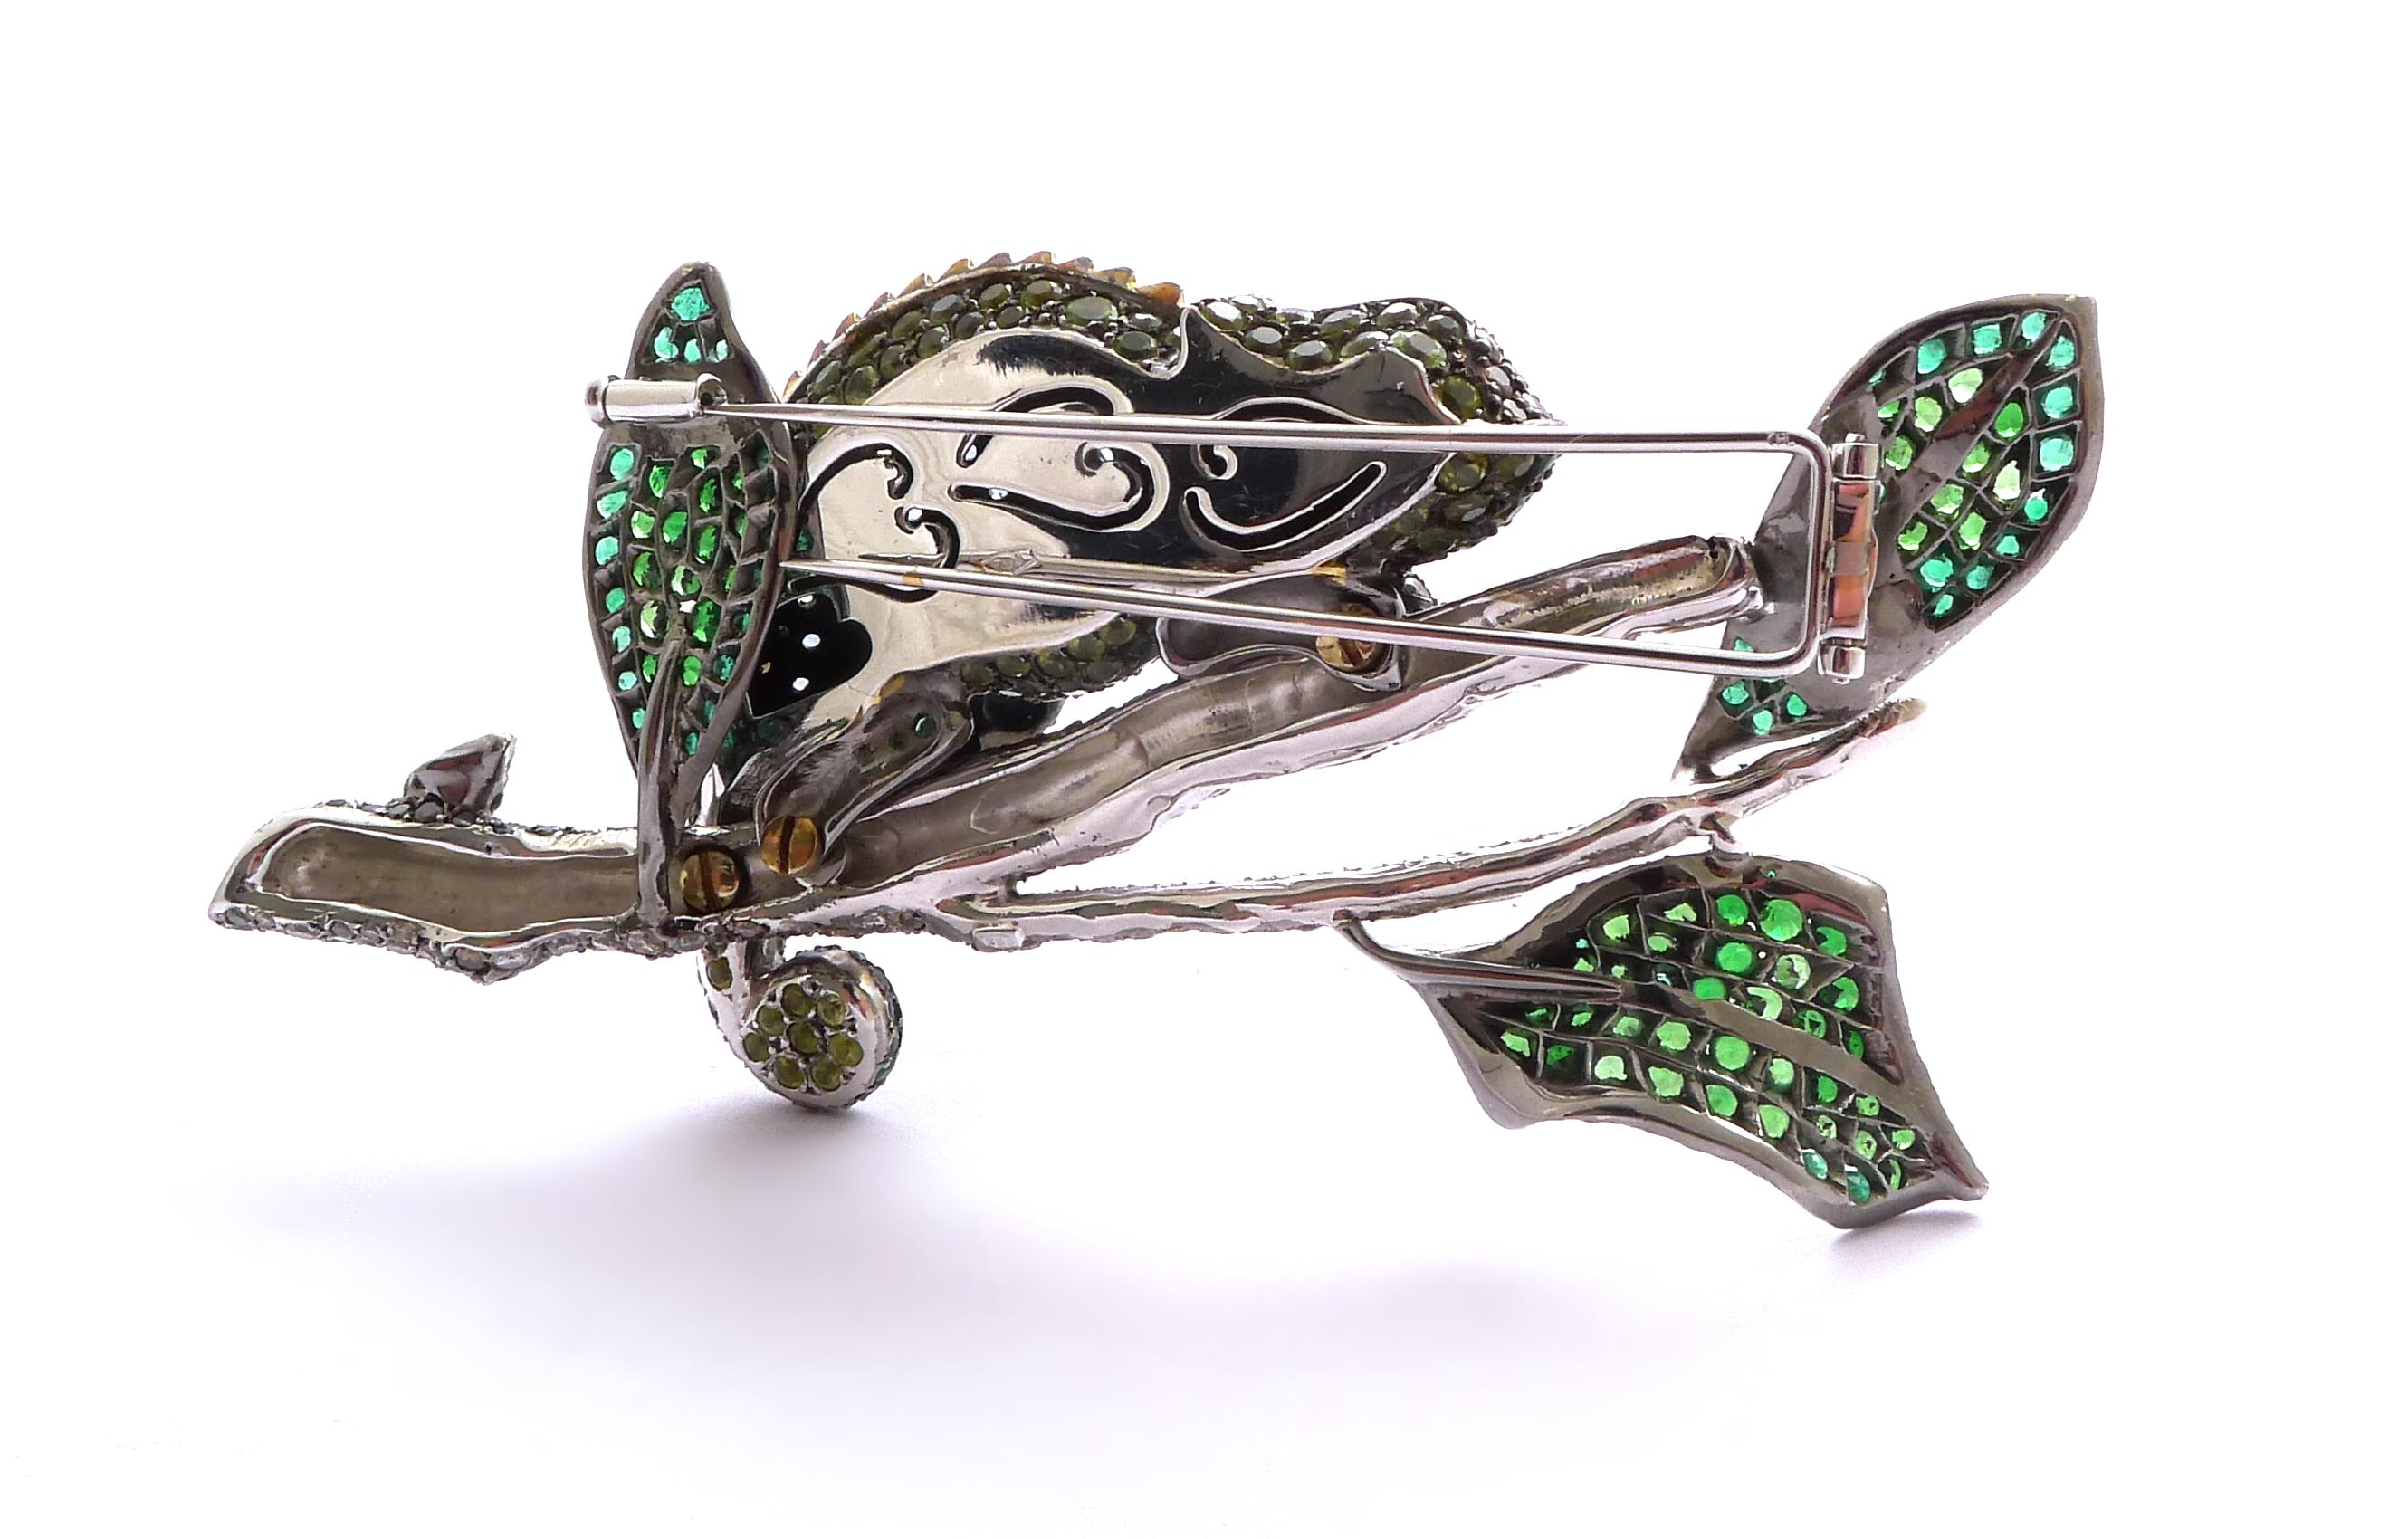 Modelled as a cameleon on a branch with leaves, set throughout with round emeralds, peridots, aquamarines, tsavorite garnets and diamonds, the eye as a cabochon ruby

Mounted in silver and 18K white gold

- 389 round diamonds: 13.83 ct total
- 247